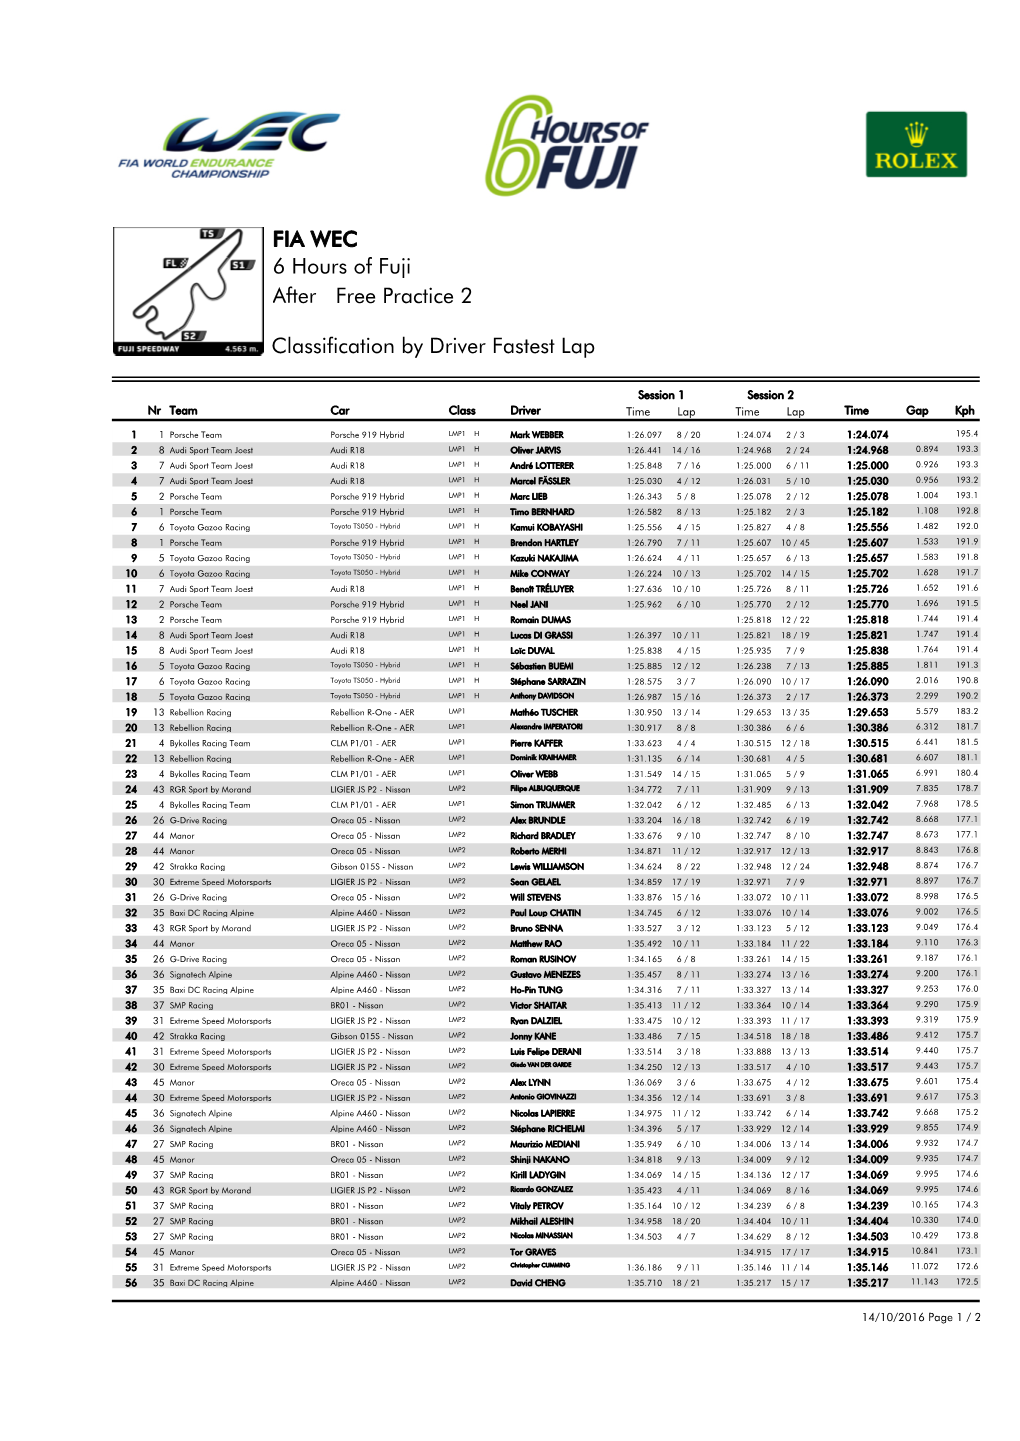 Free Practice 2 6 Hours of Fuji FIA WEC After Classification by Driver